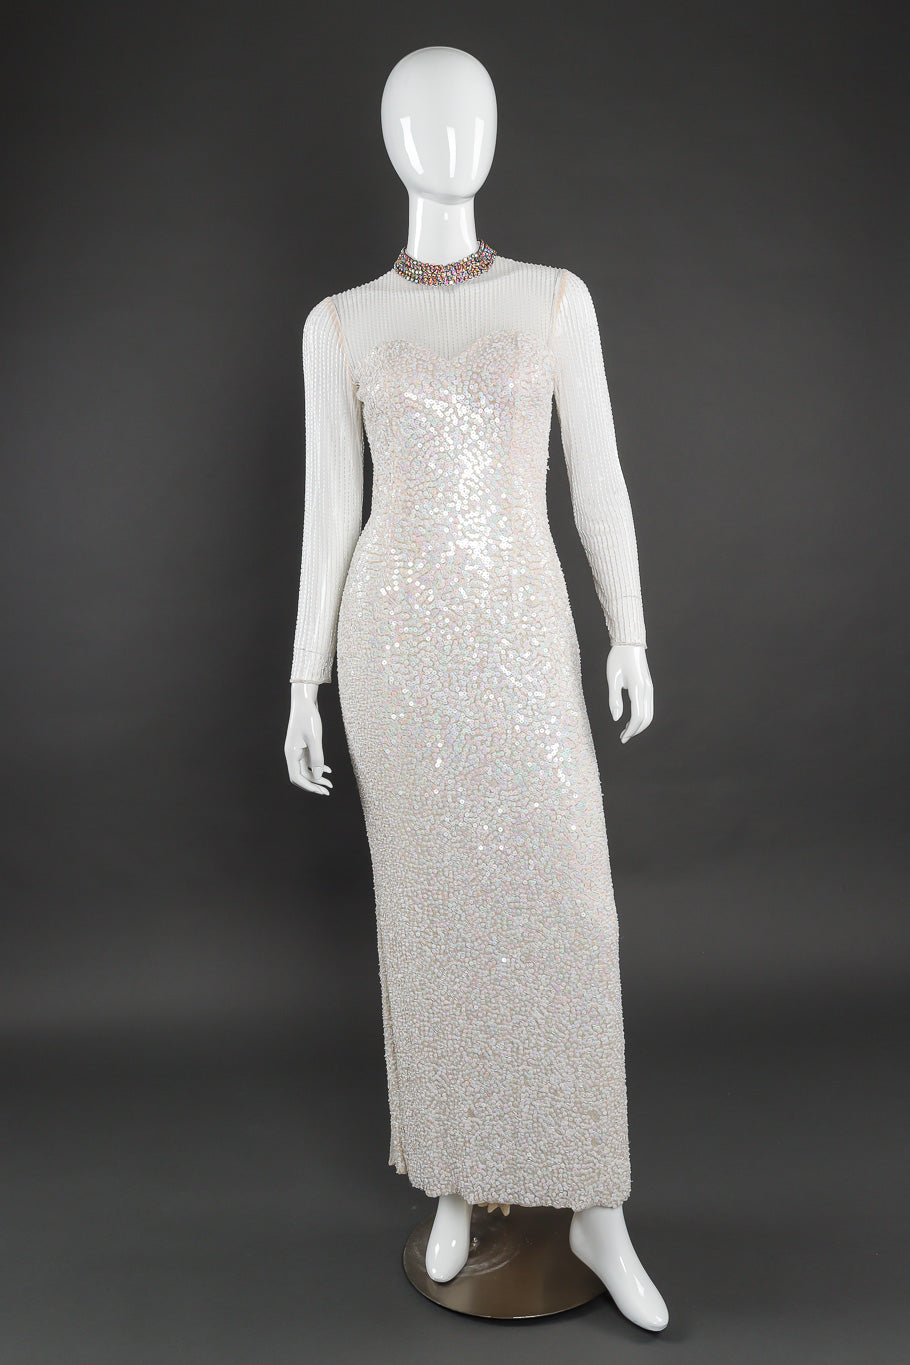 Beaded gown by Lillie Rubin on mannequin front @recessla